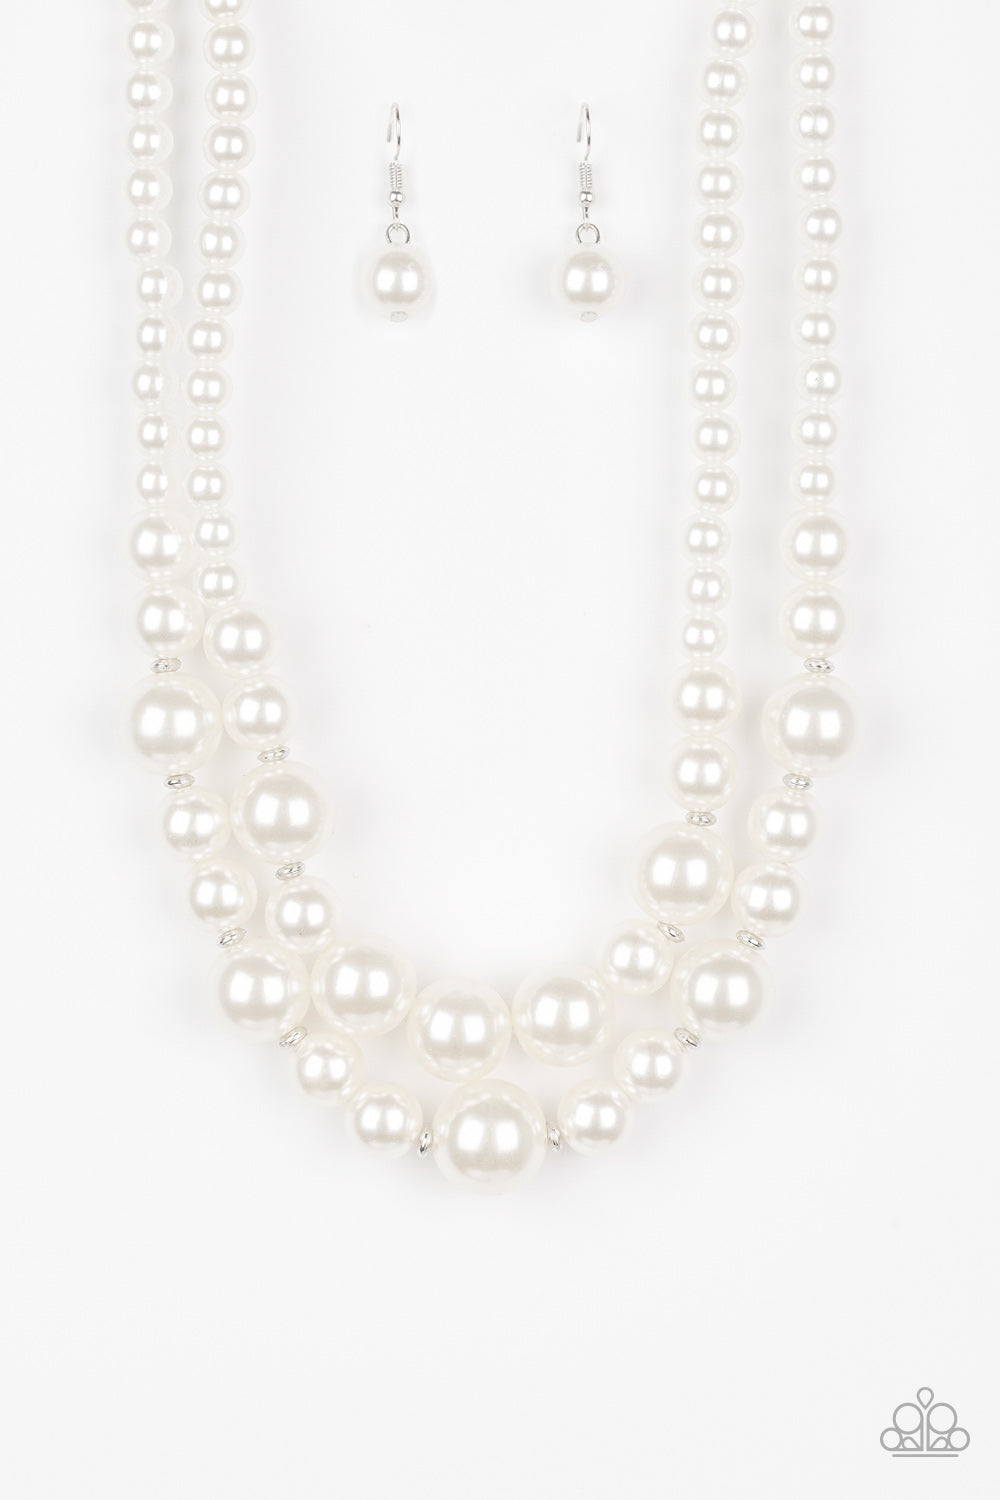 . The More The Modest - White Necklace